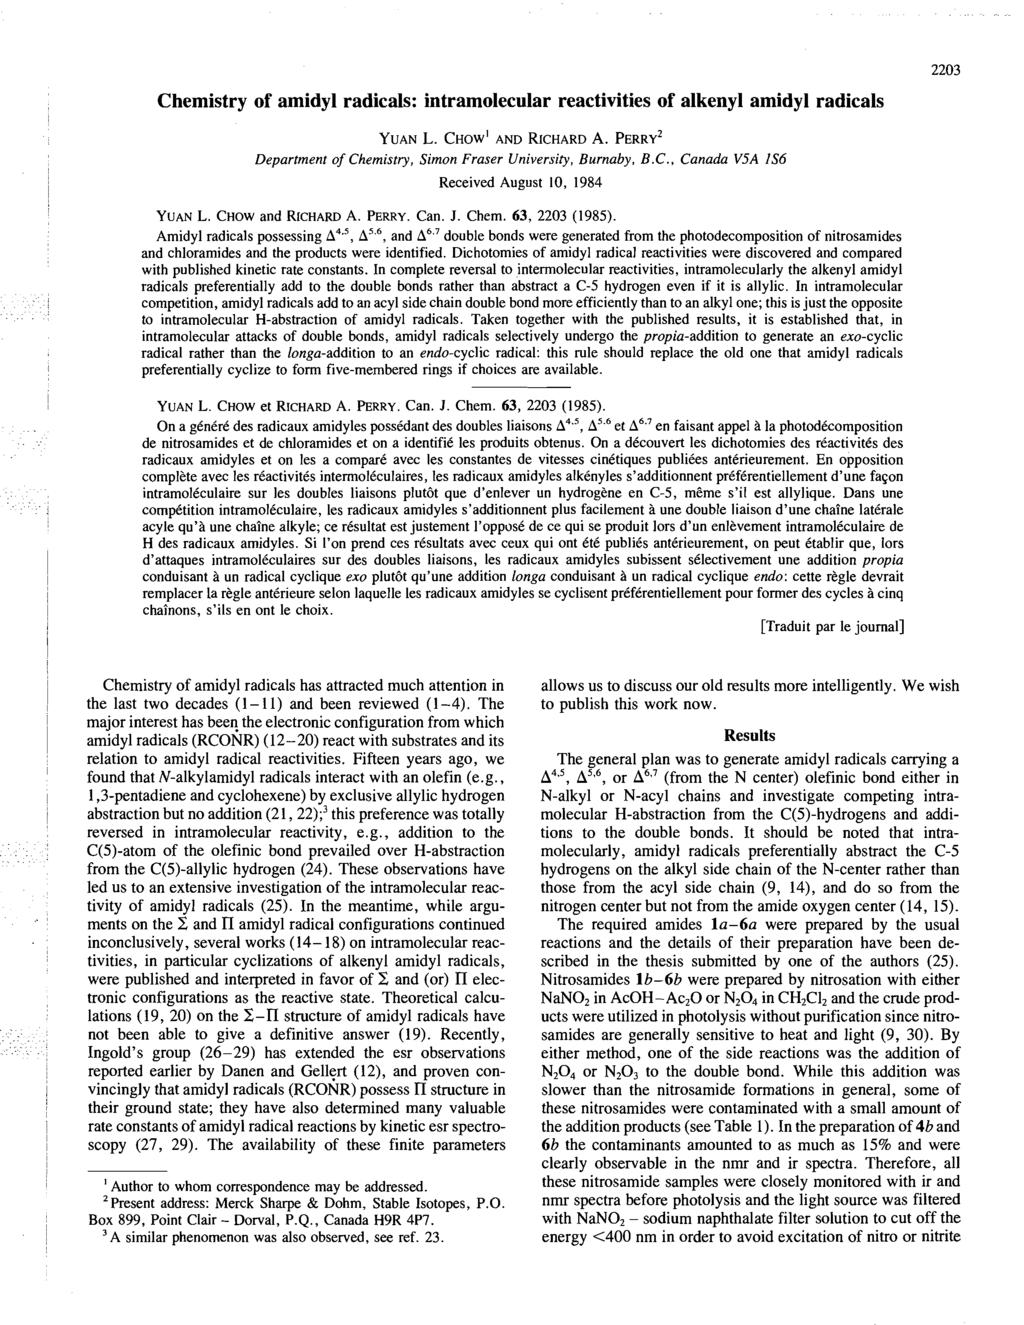 Chemistry of amidyl radicals: intramolecular reactivities of alkenyl amidyl radicals YUAN L. CHOW' AND RICHARD A. PERRY' Department of Chemistry, Simon Fraser University, Burnaby, B.C., Canada V5A IS6 Received August 10, 1984 YUAN L.